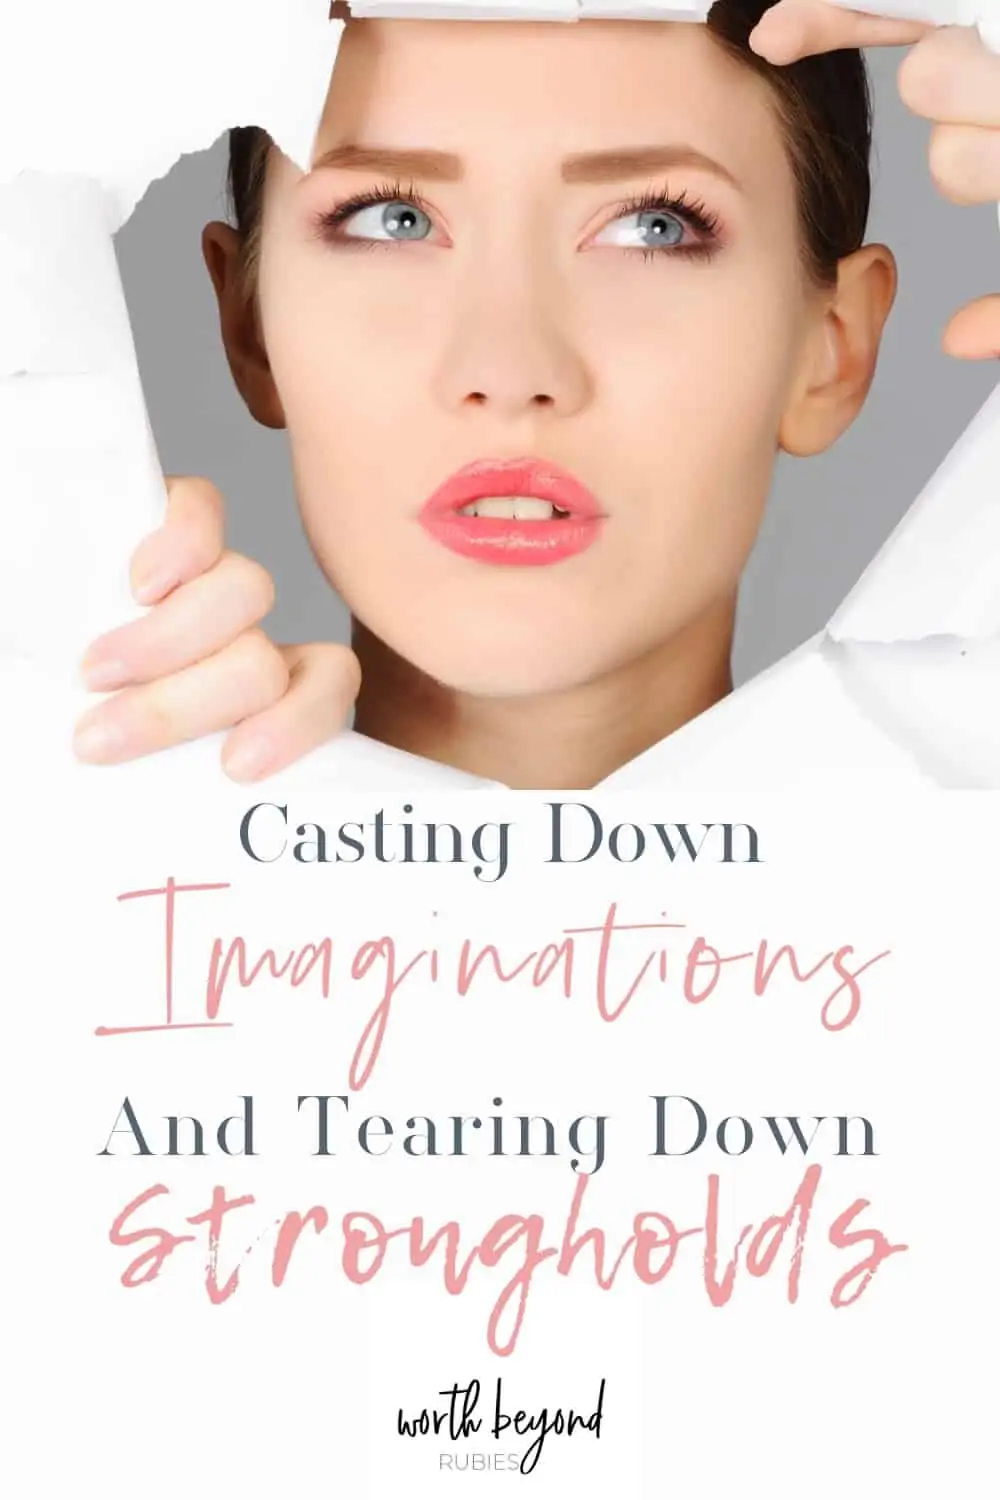 An image of a woman's face and hands poking through a hole in white paper and text that says Casting Down Imaginations and Tearing Down Strongholds